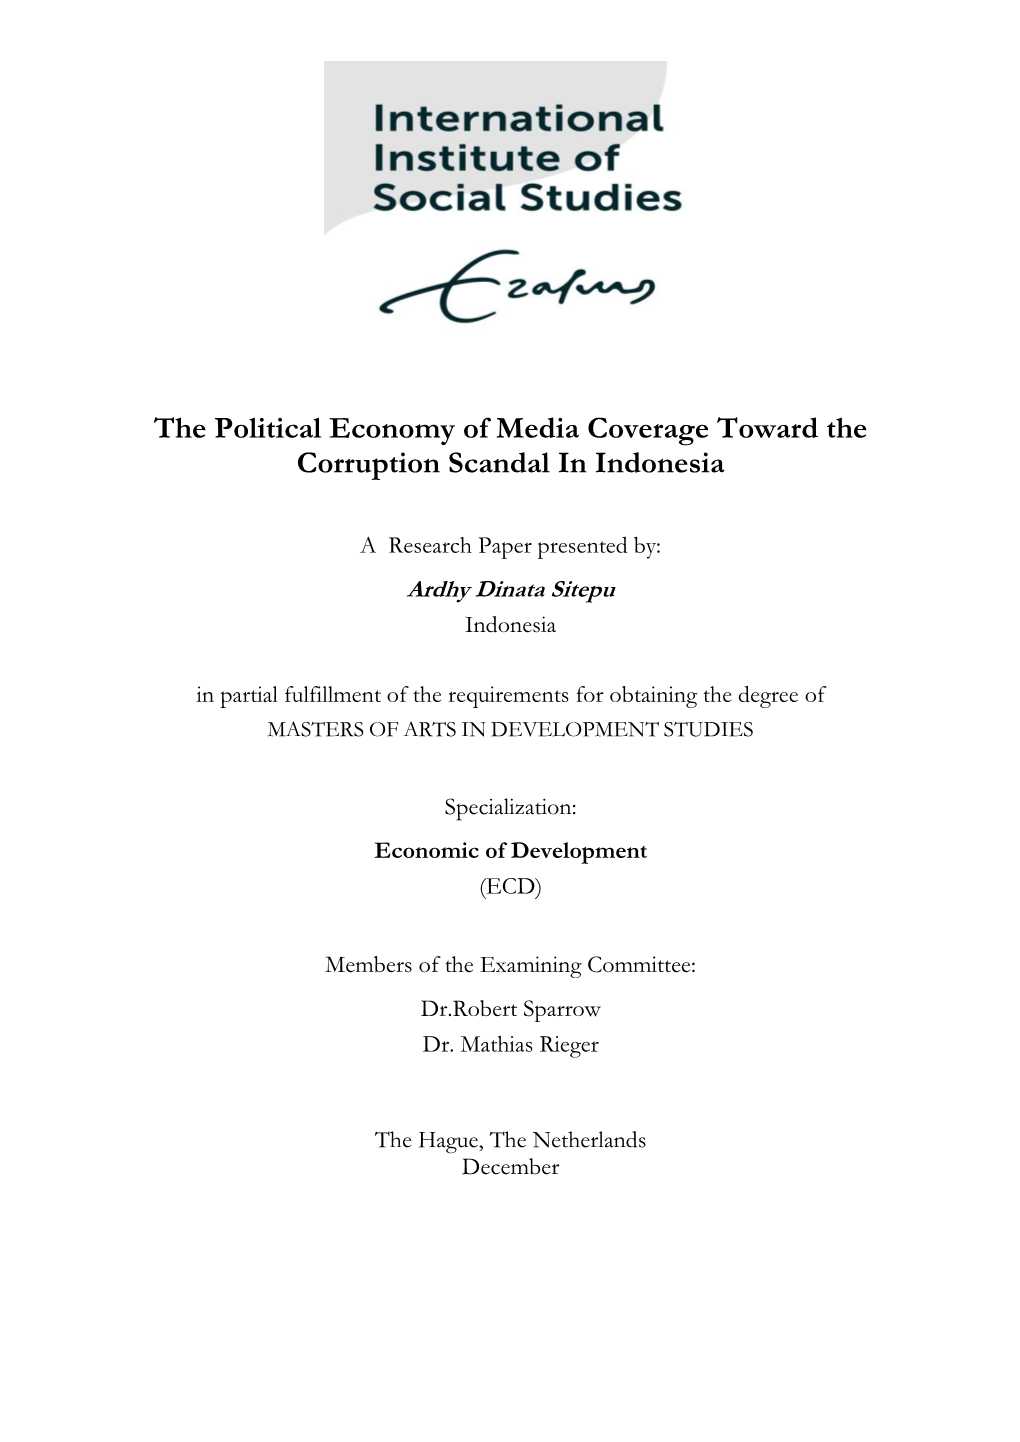 The Political Economy of Media Coverage Toward the Corruption Scandal in Indonesia